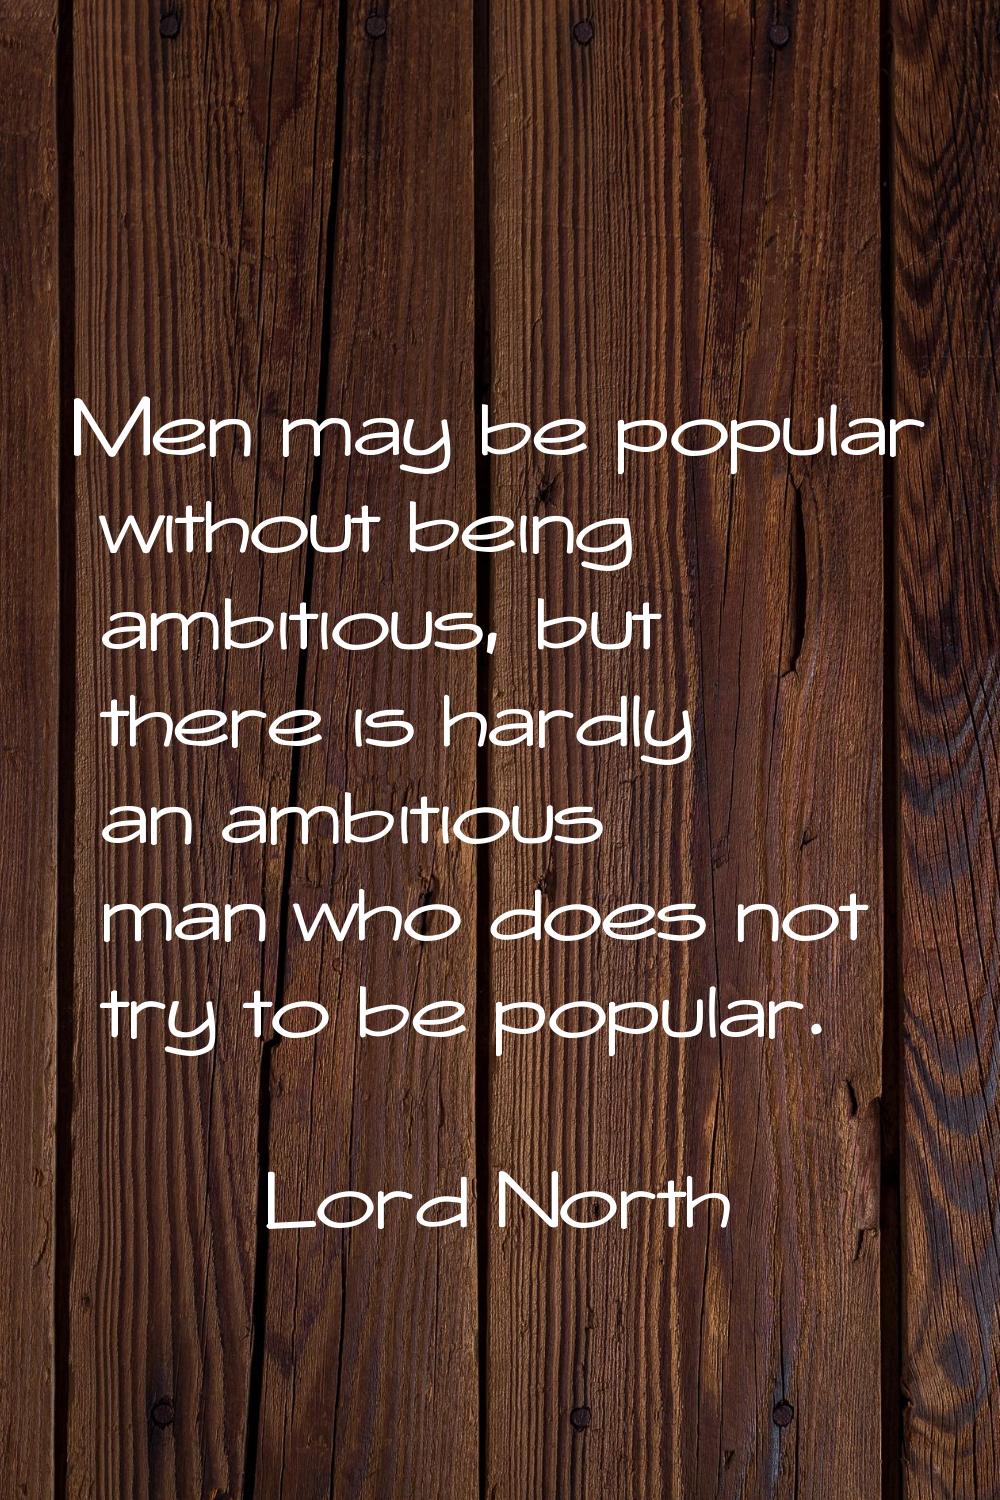 Men may be popular without being ambitious, but there is hardly an ambitious man who does not try t